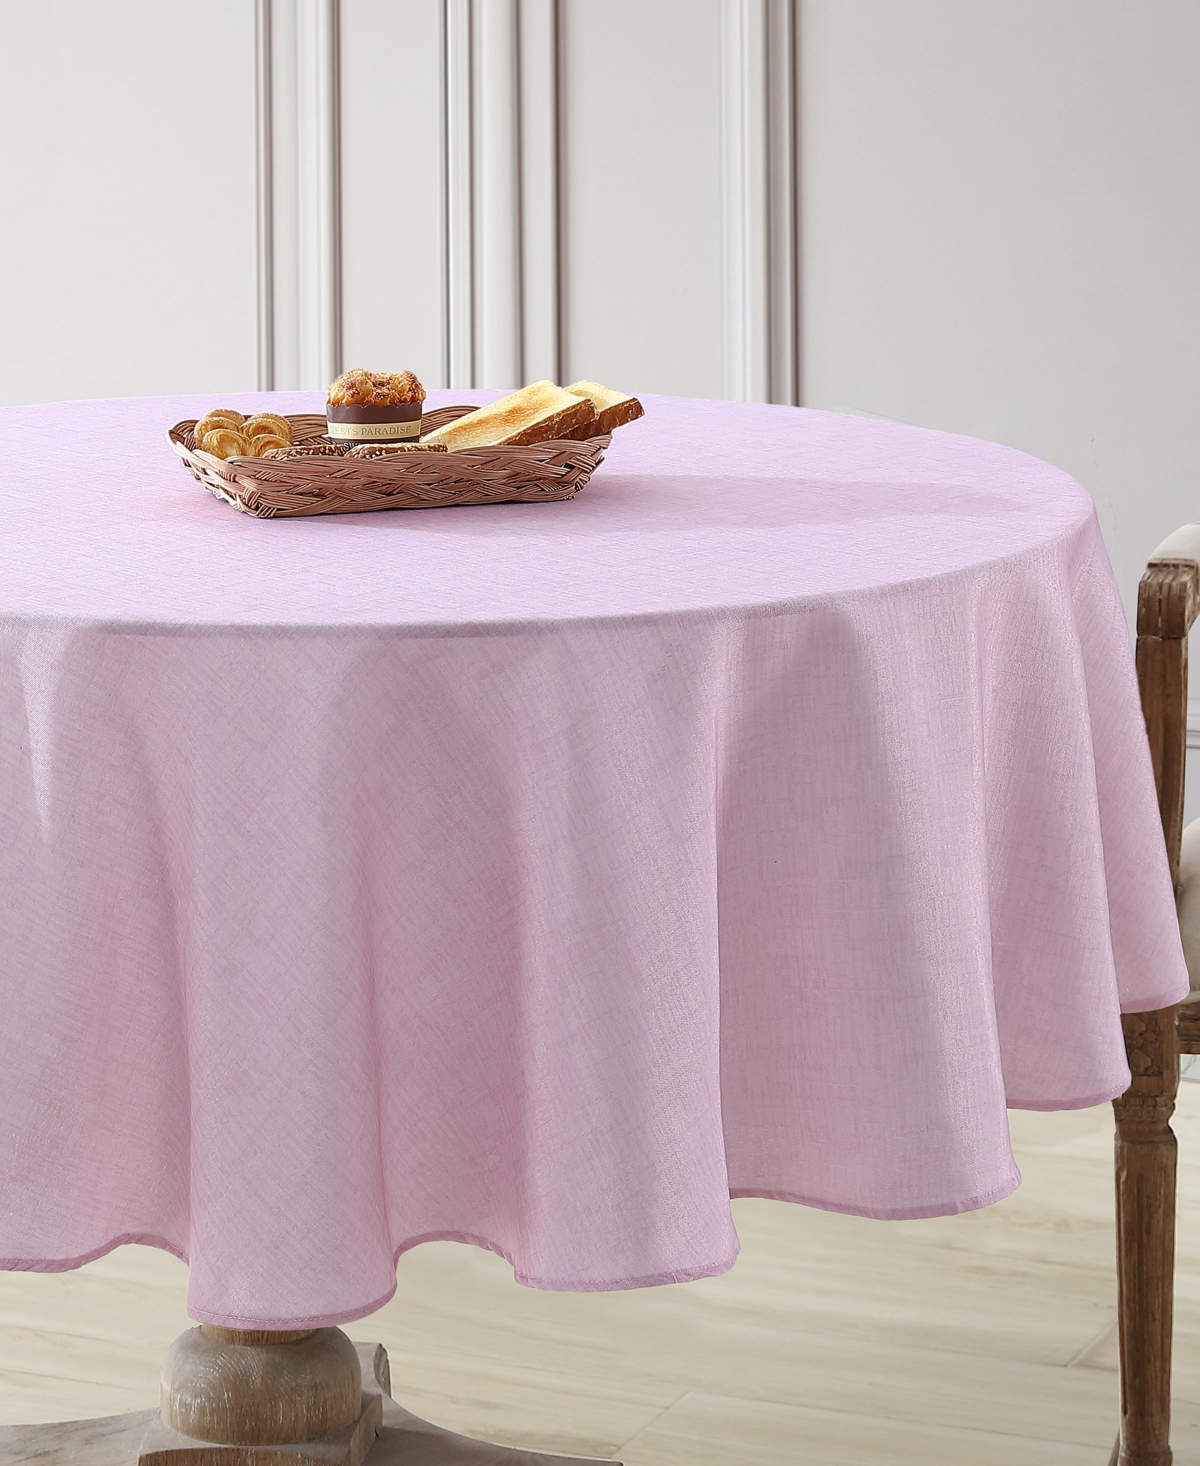 Laura Ashley Easy Care Tablecloth, 70" Round In Blush